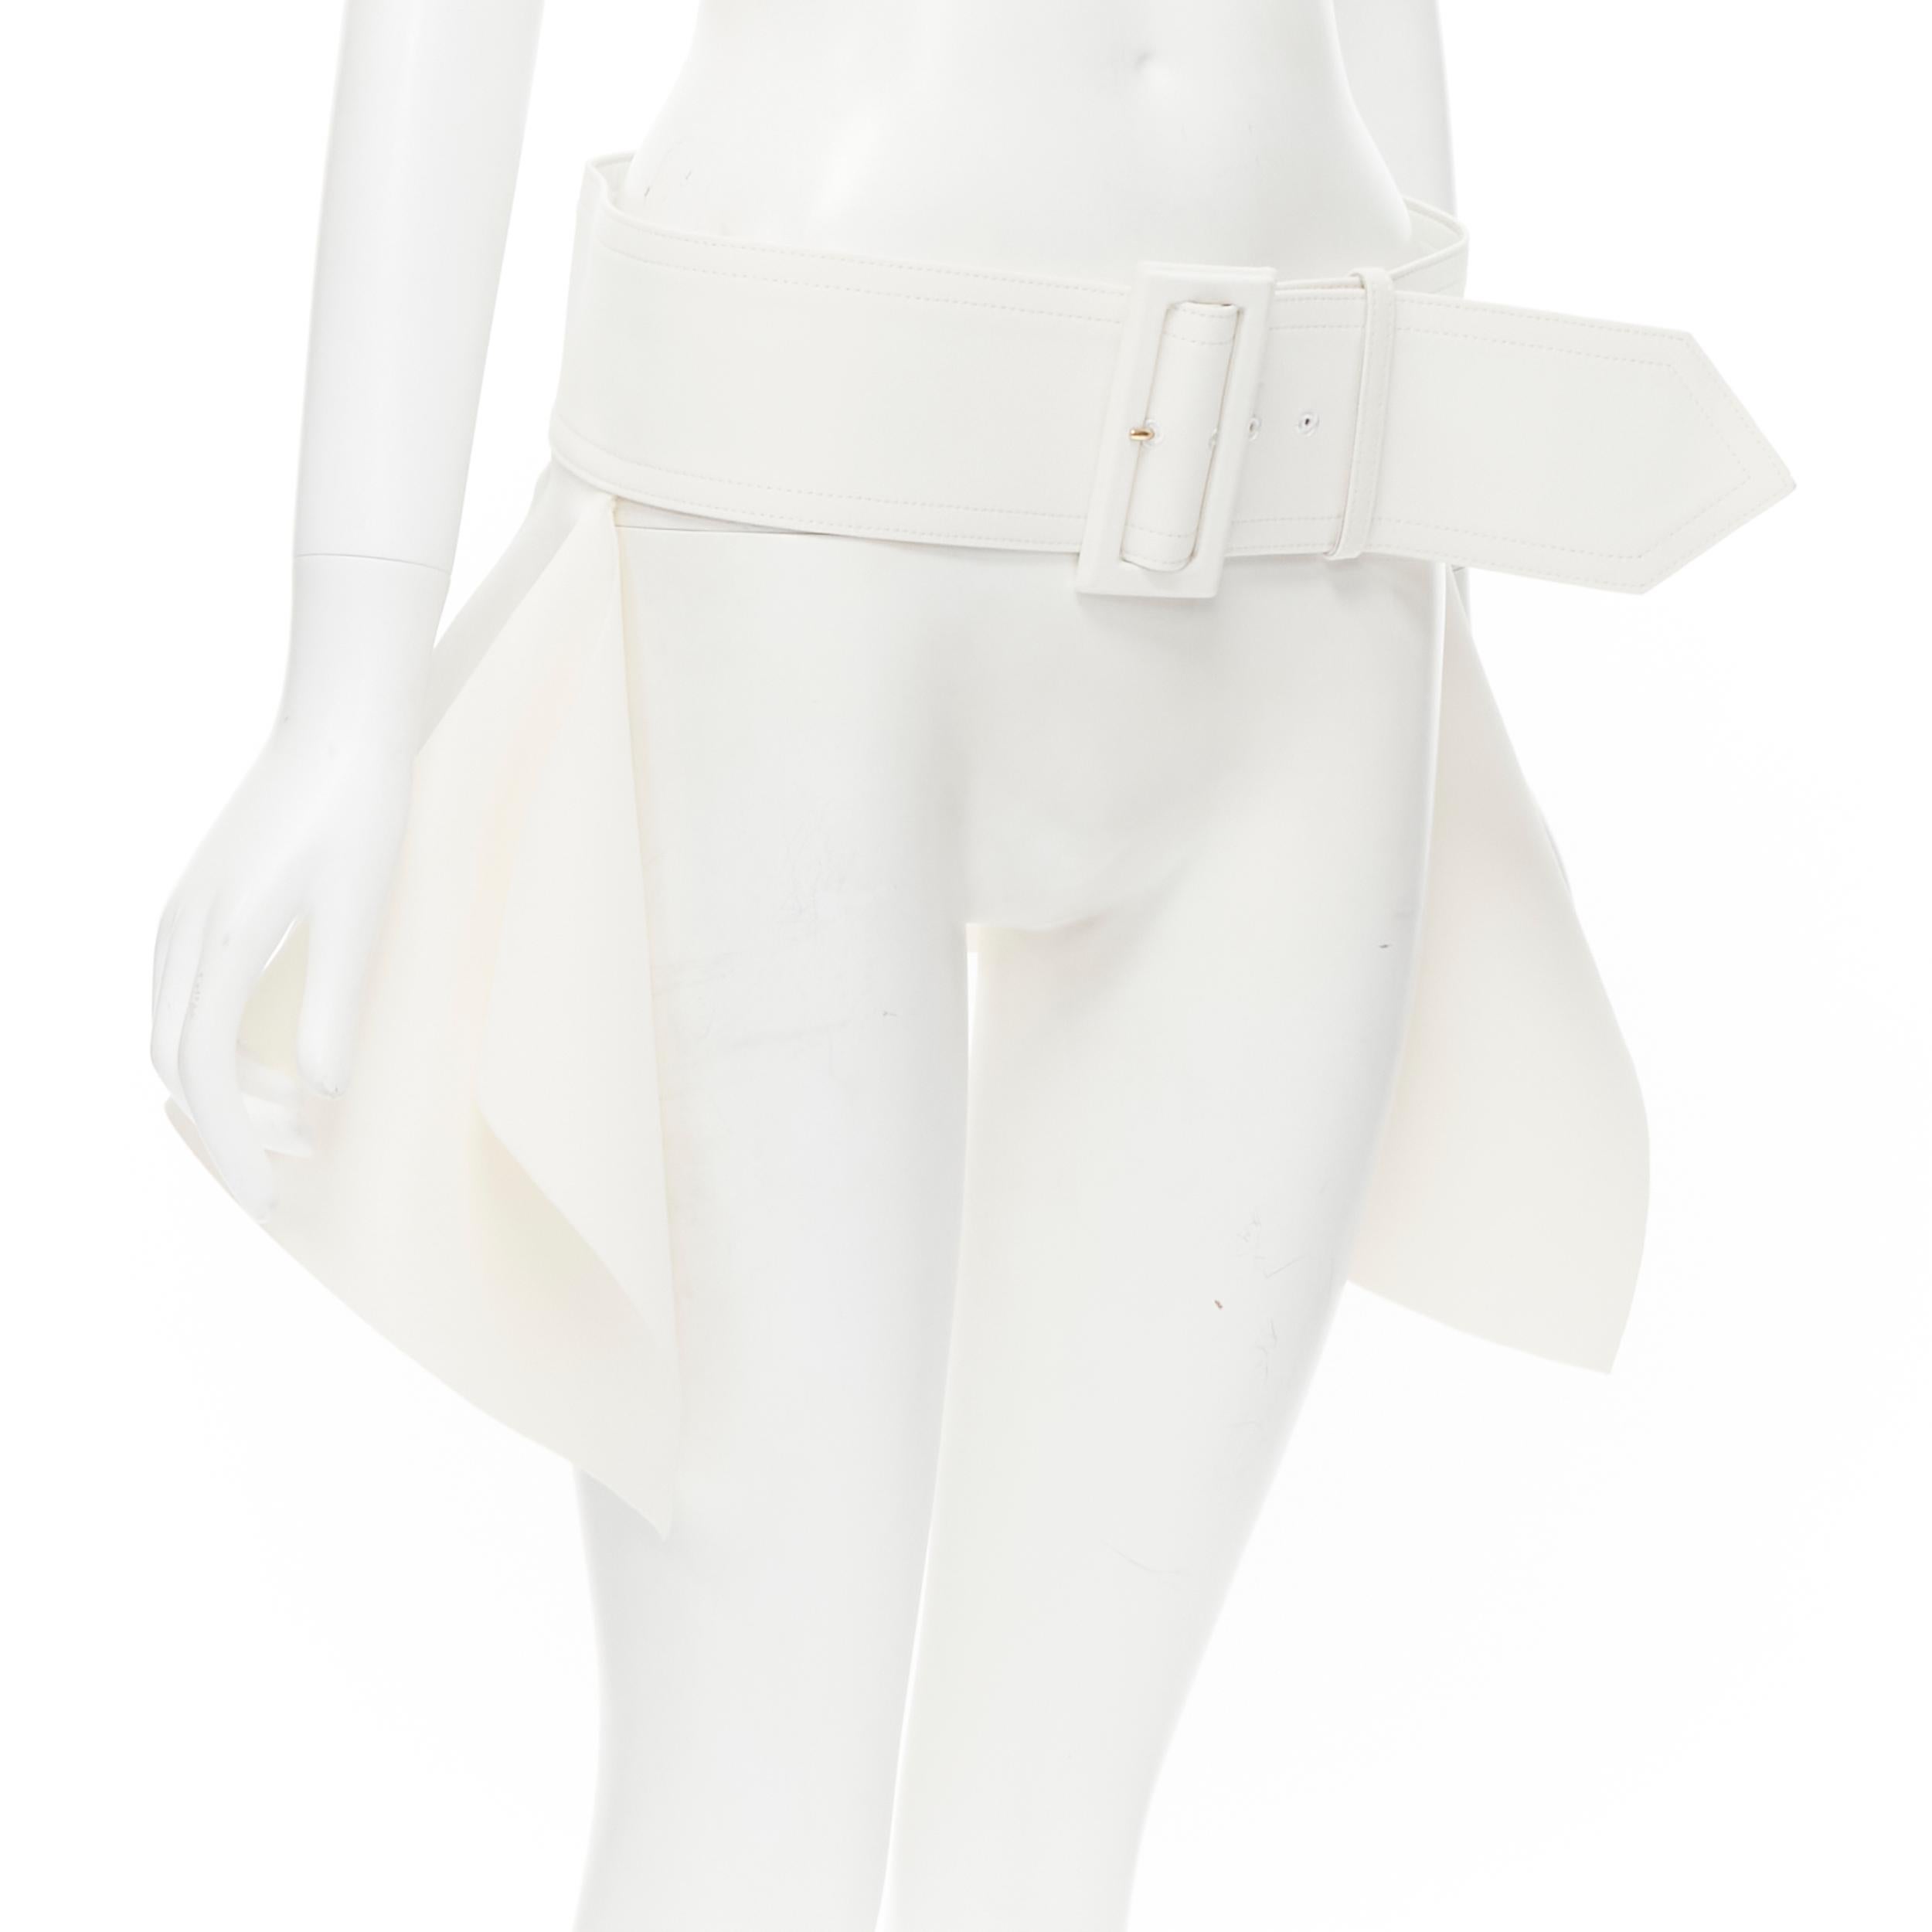 OLD CELINE 2012 Phoebe Philo white leather lined large buckle peplum belt S 
Reference: TGAS/B01663 
Brand: Celine 
Designer: Phoebe Philo 
Collection: Spring Summer 2012 Runway 
Material: Crepe 
Color: White 
Pattern: Solid 
Closure: Buckle 
Extra